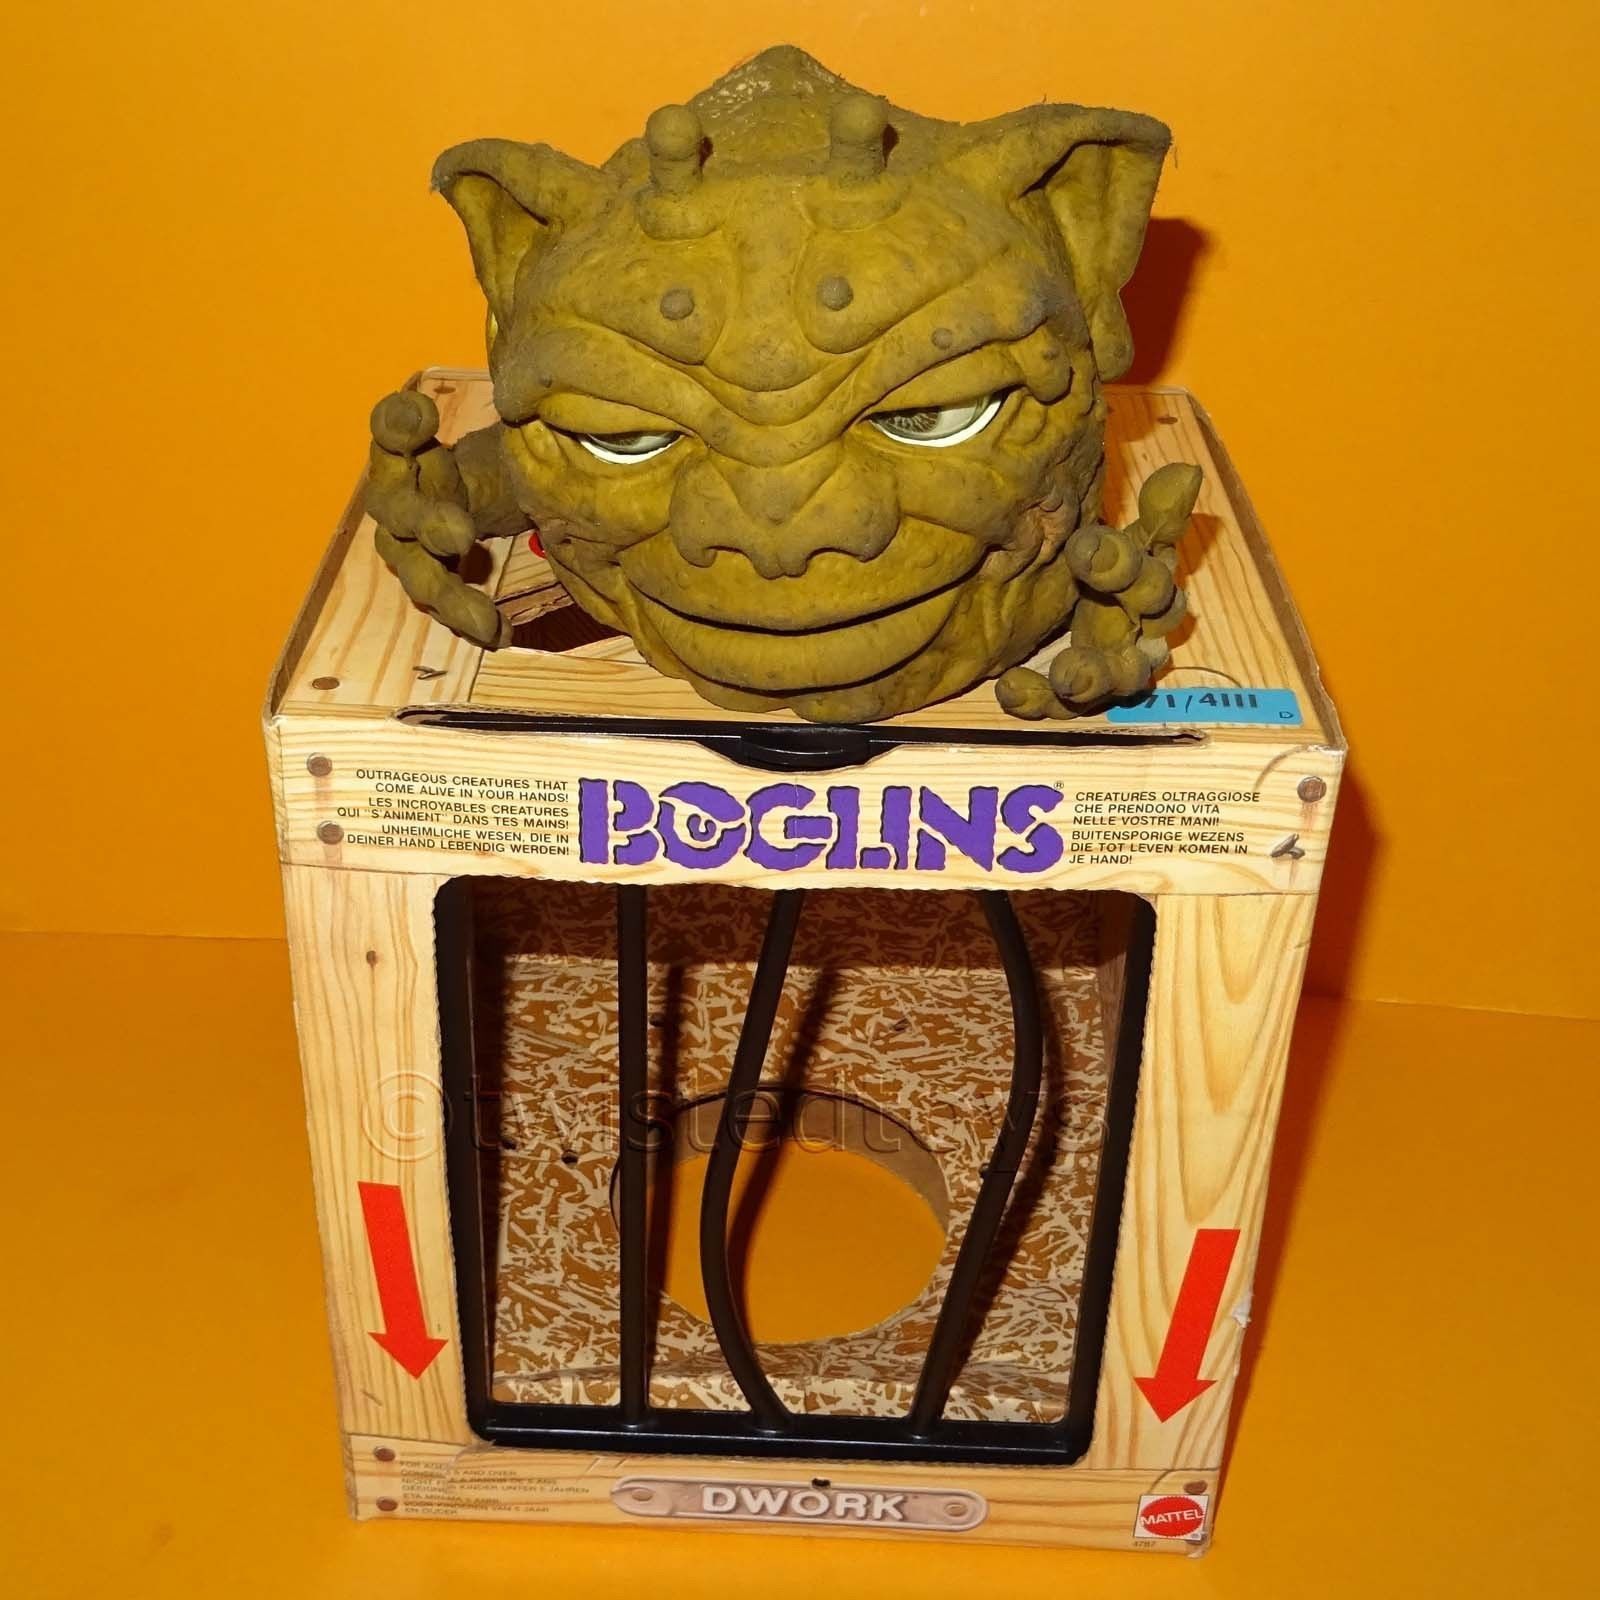 Boglins - While technically this toy that came out in 1987, it has a real 90s feel to it. The packaging was genius, you could raise and lower the gate, and also control the Boglin from the hole under the cage. The eyes glowed in the dark and could be moved from the puppet mechanism inside. These fucking ruled!